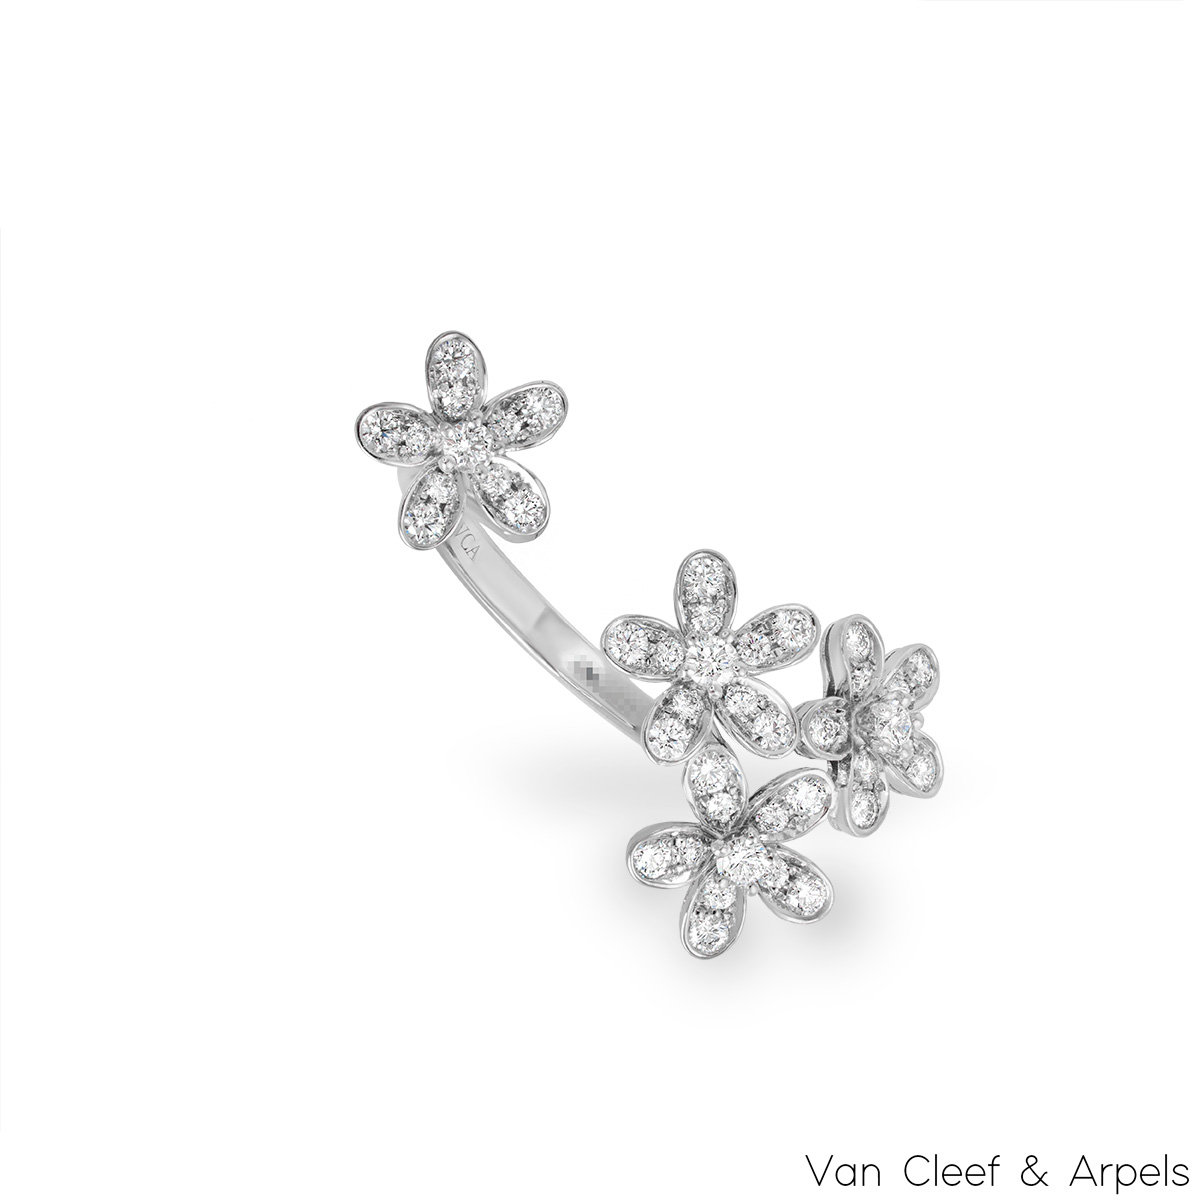 Van Cleef & Arpels White Gold Diamond Socrate Ring VCARB14500